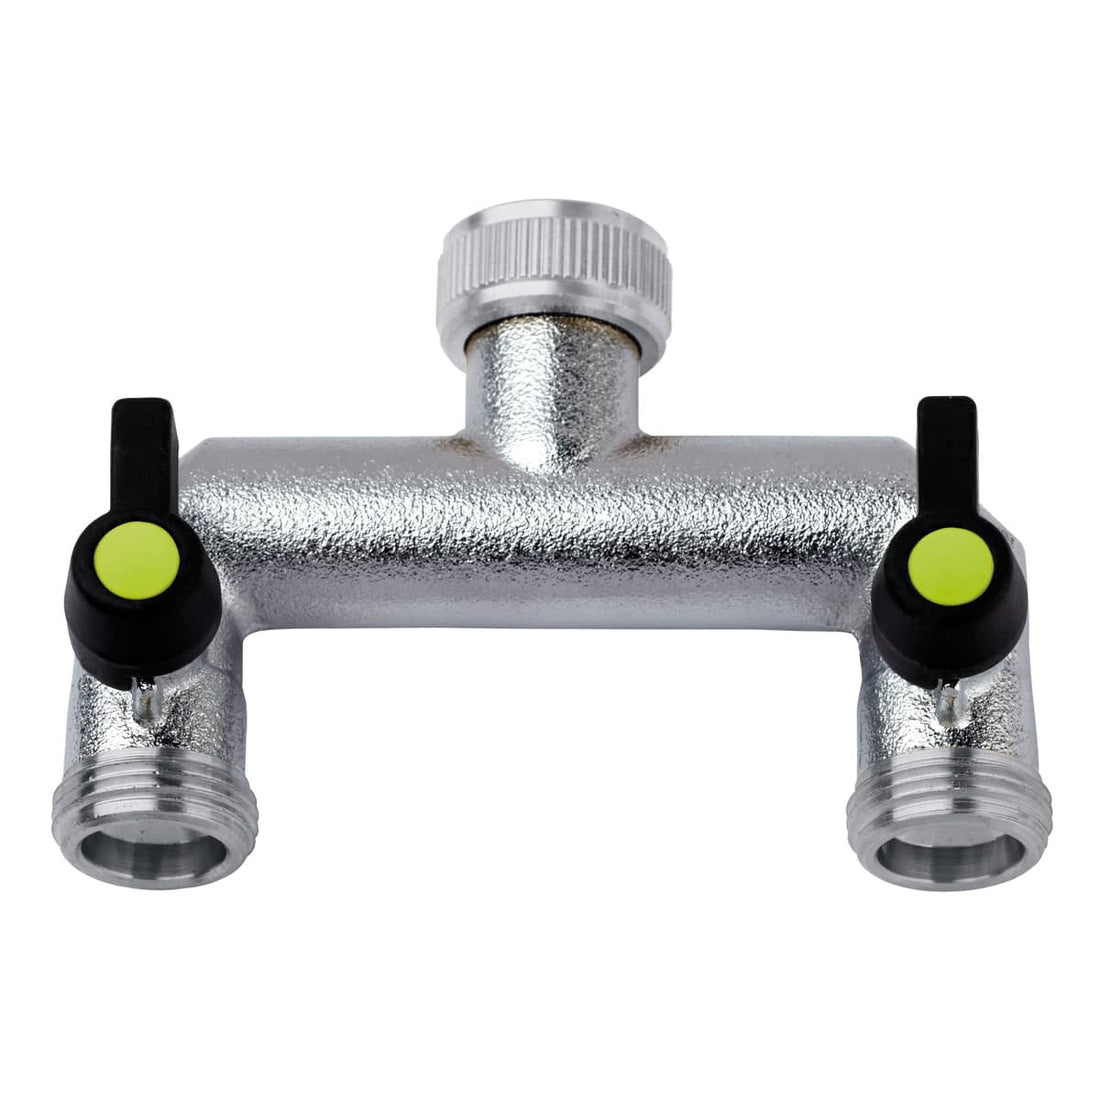 2-WAY CHROME FAUCET IND AND REG.